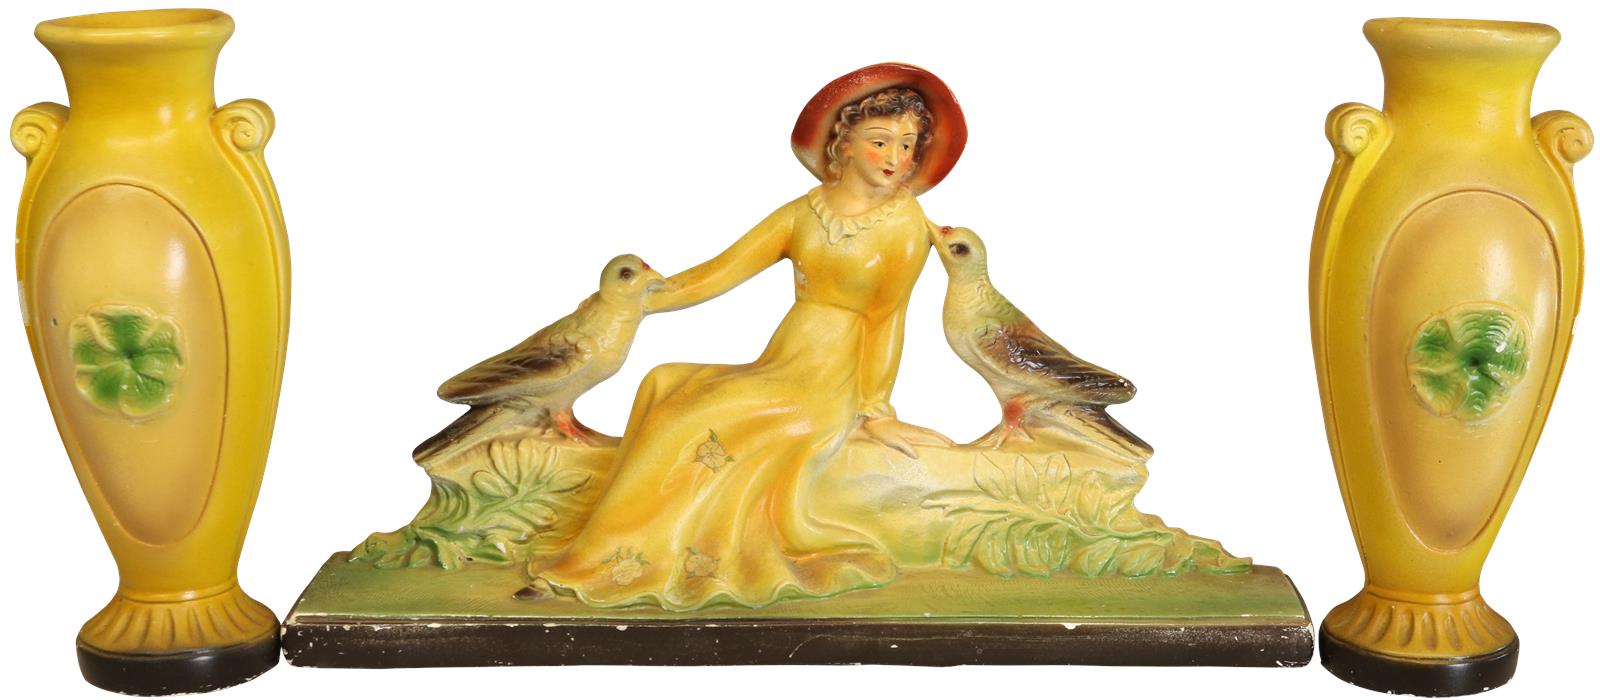 Colorful Antique Art Deco Chalkware Sculpture of Lady with Birds and Pair of Vases-Image 1